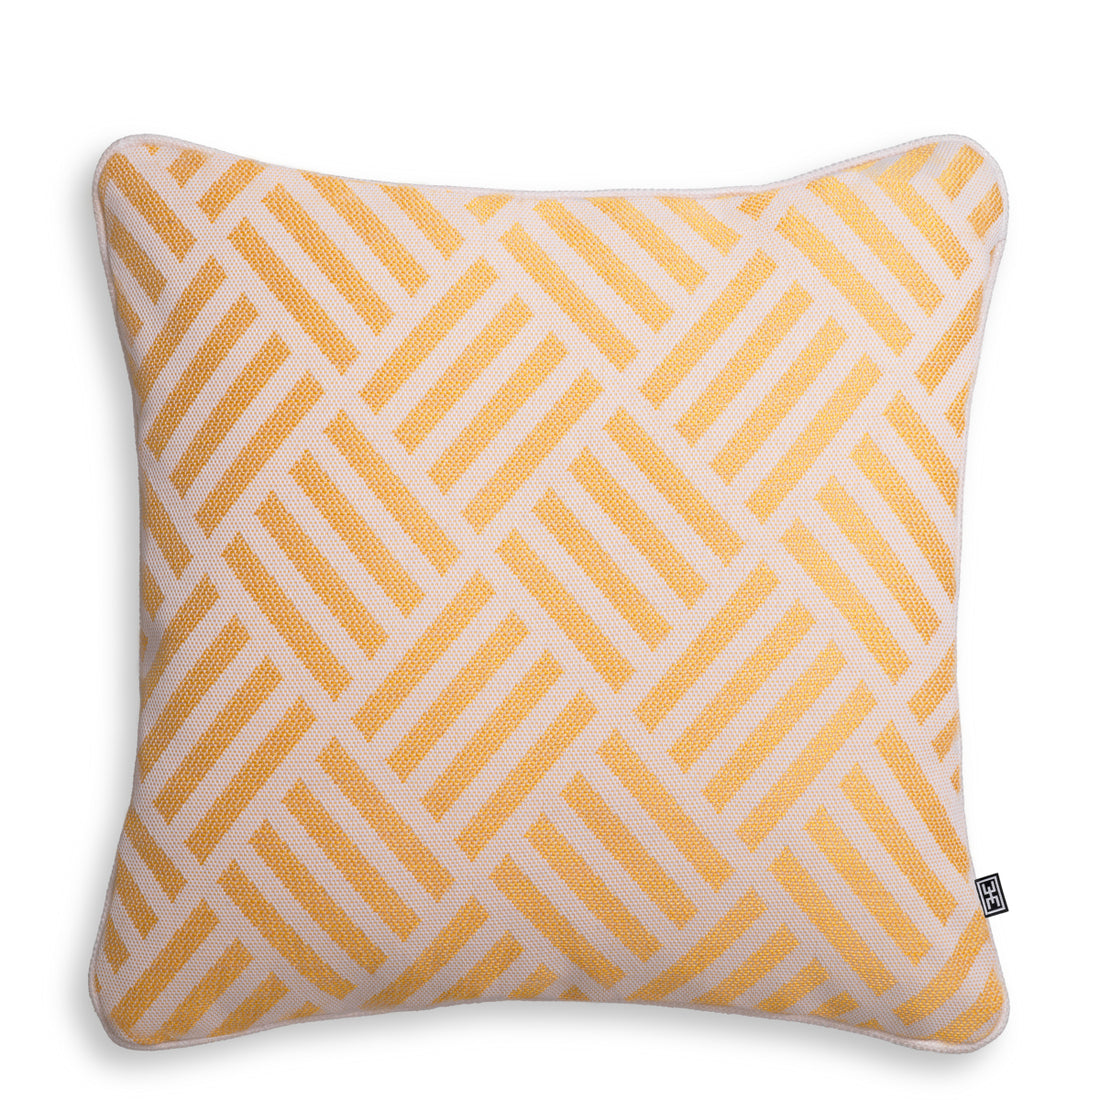 Cushion Sonel S yellow with white piping